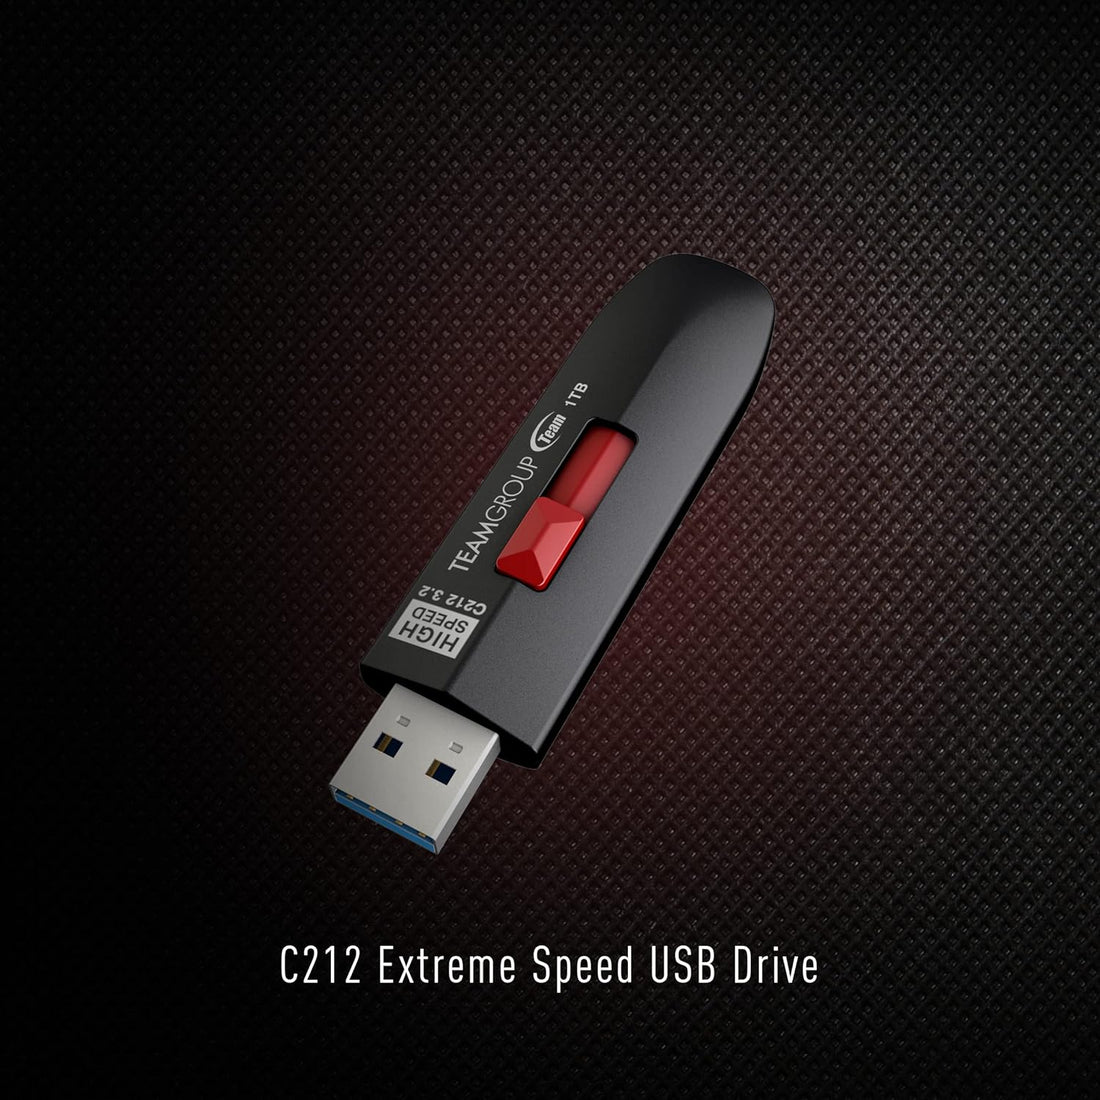 TEAMGROUP C212 Extreme Speed 512GB 600/500MB/s USB 3.2 Gen 2, Easy Push-and-Pull Design USB Flash Thumb Drive, External Data Storage Memory Stick Compatible with Computer/Laptop/PS4 PS5 TC2123512GB01